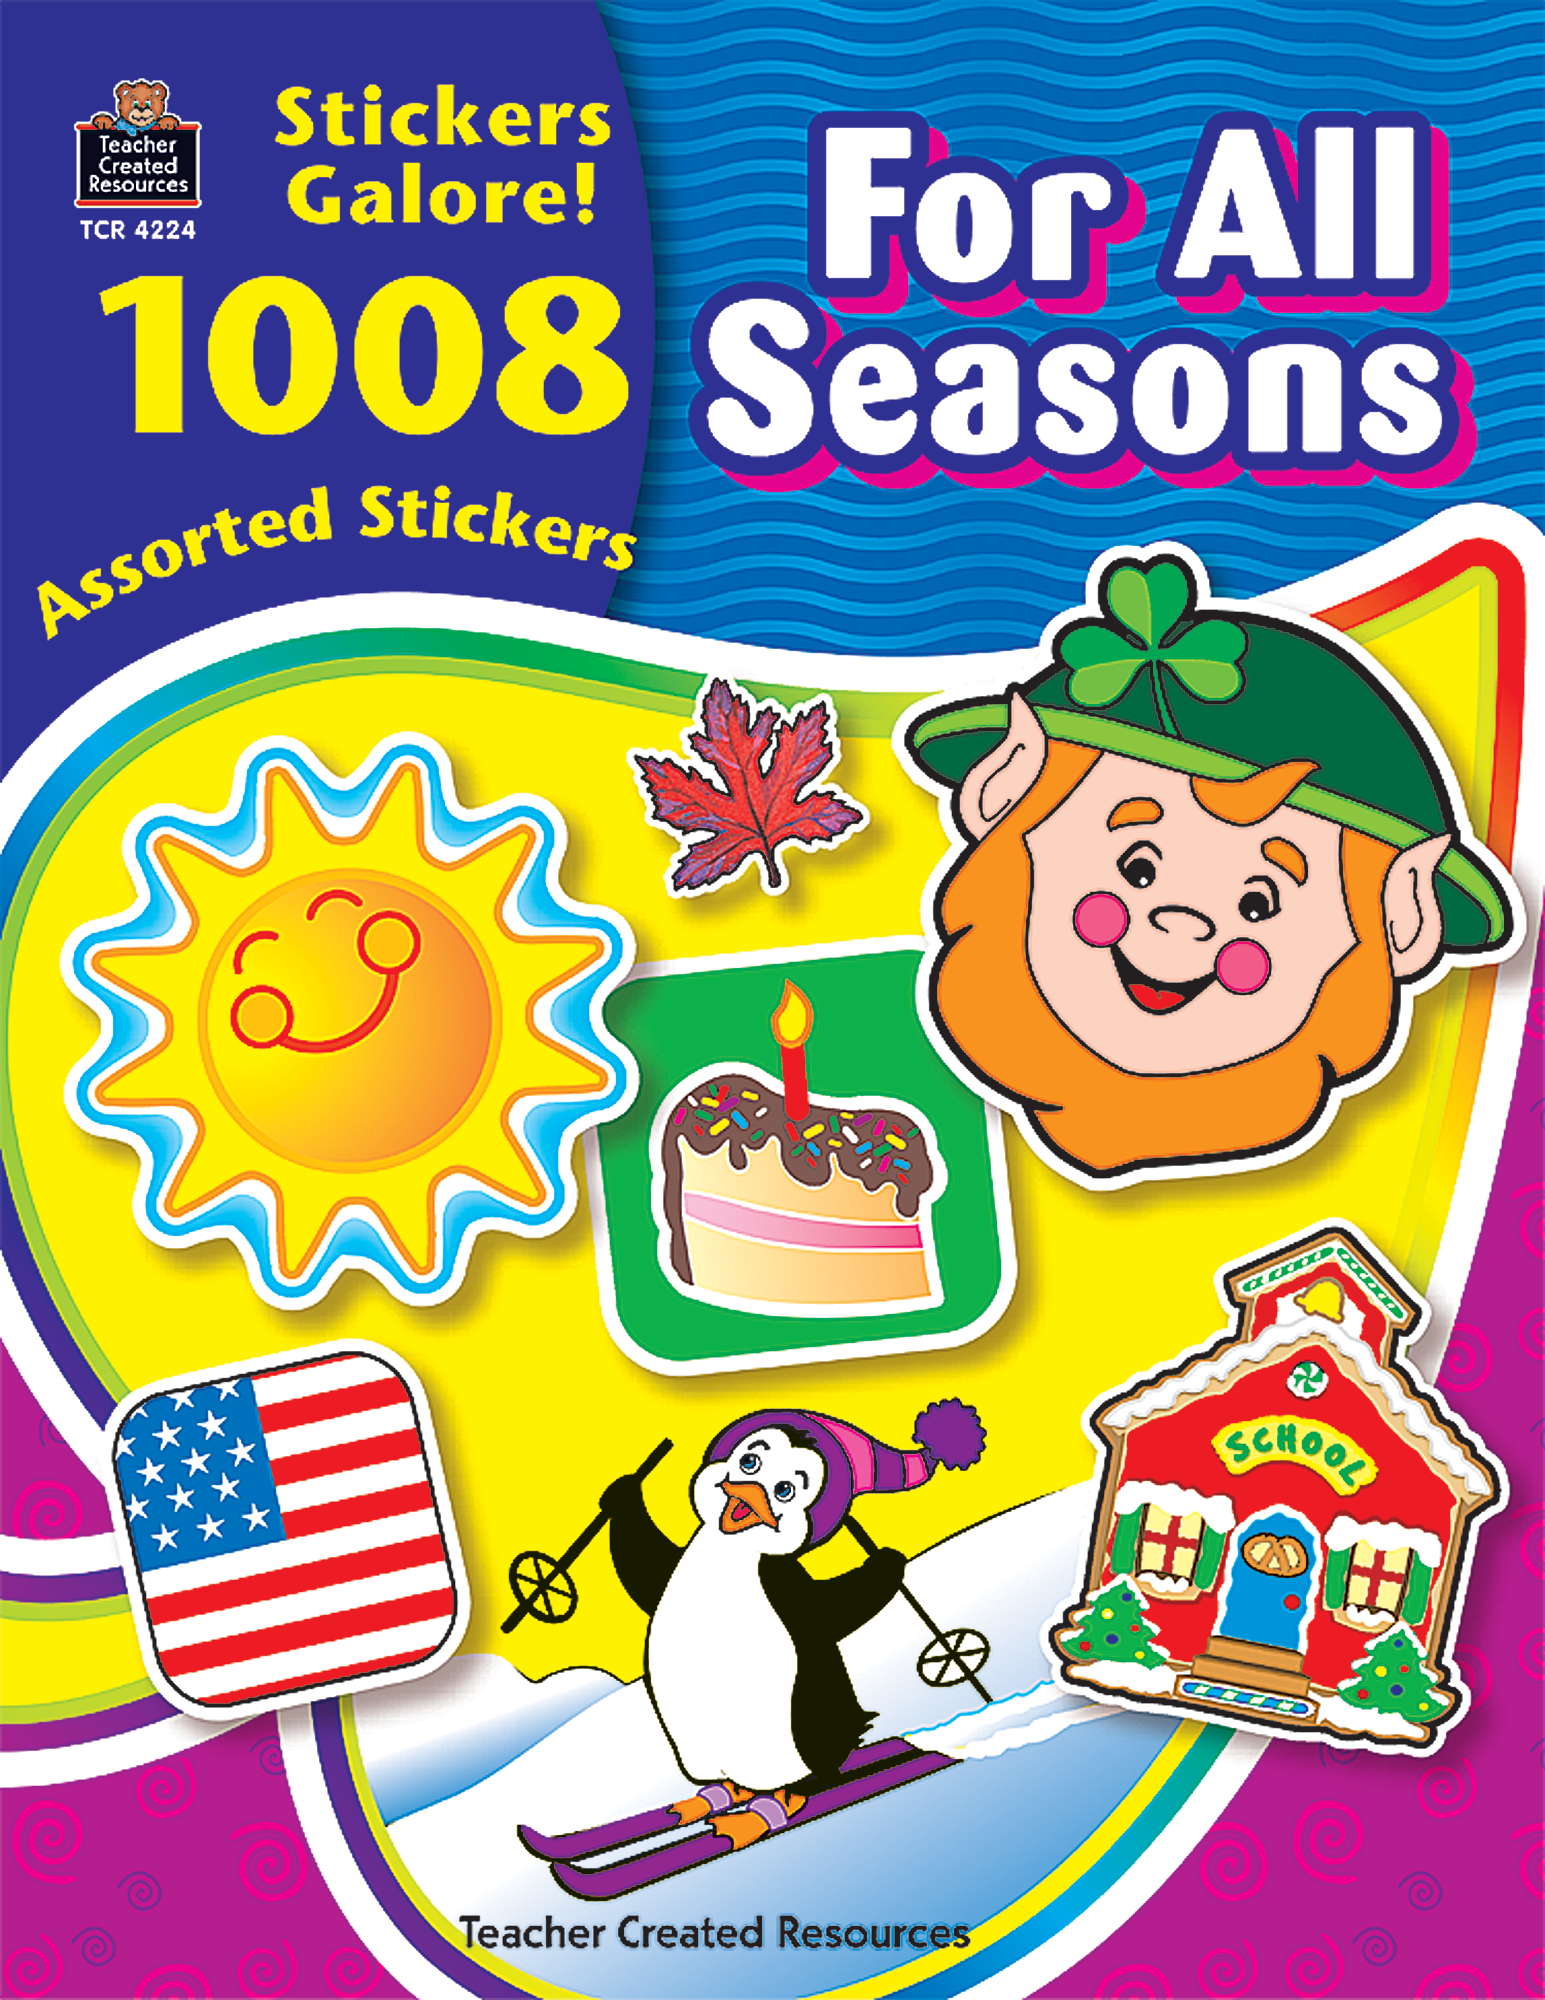 Does it seem like your kids are always asking for stickers? That they can never get enough of them? These books of stickers should satisfy them! Each 81⁄2" x 11" book has hundreds of stickers for hours—days—weeks—even months of fun!